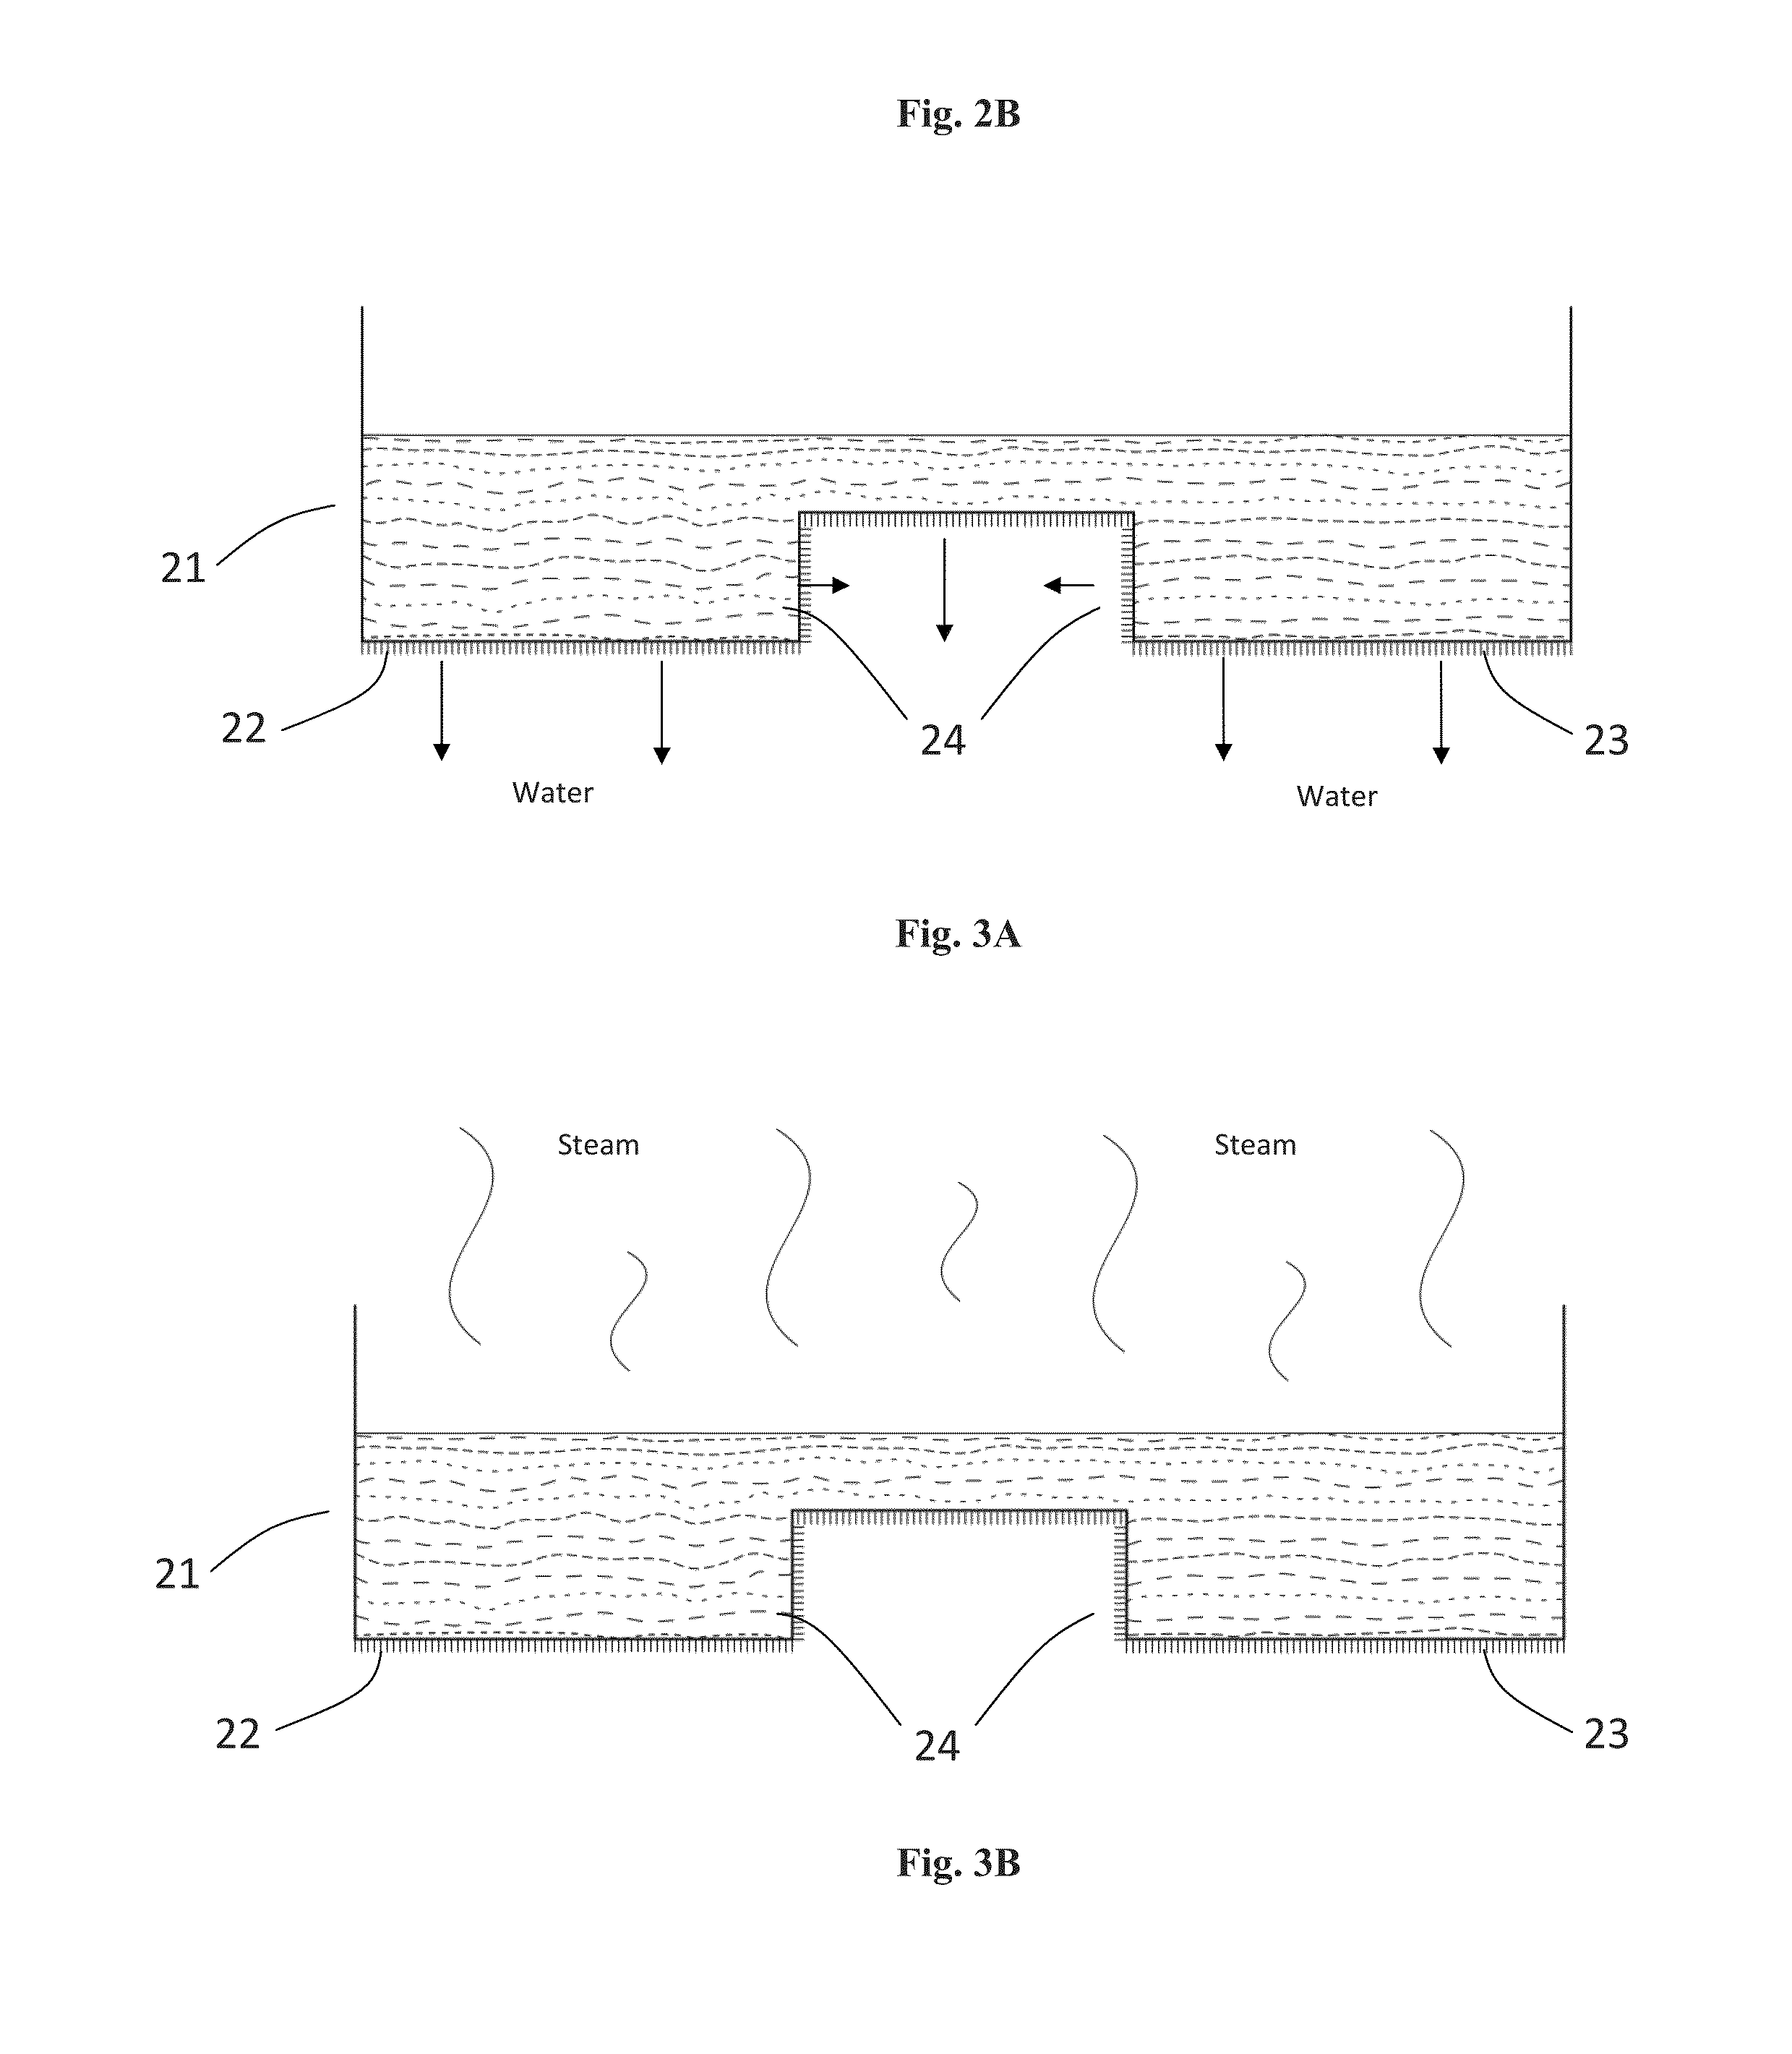 Method of forming a fibrous product